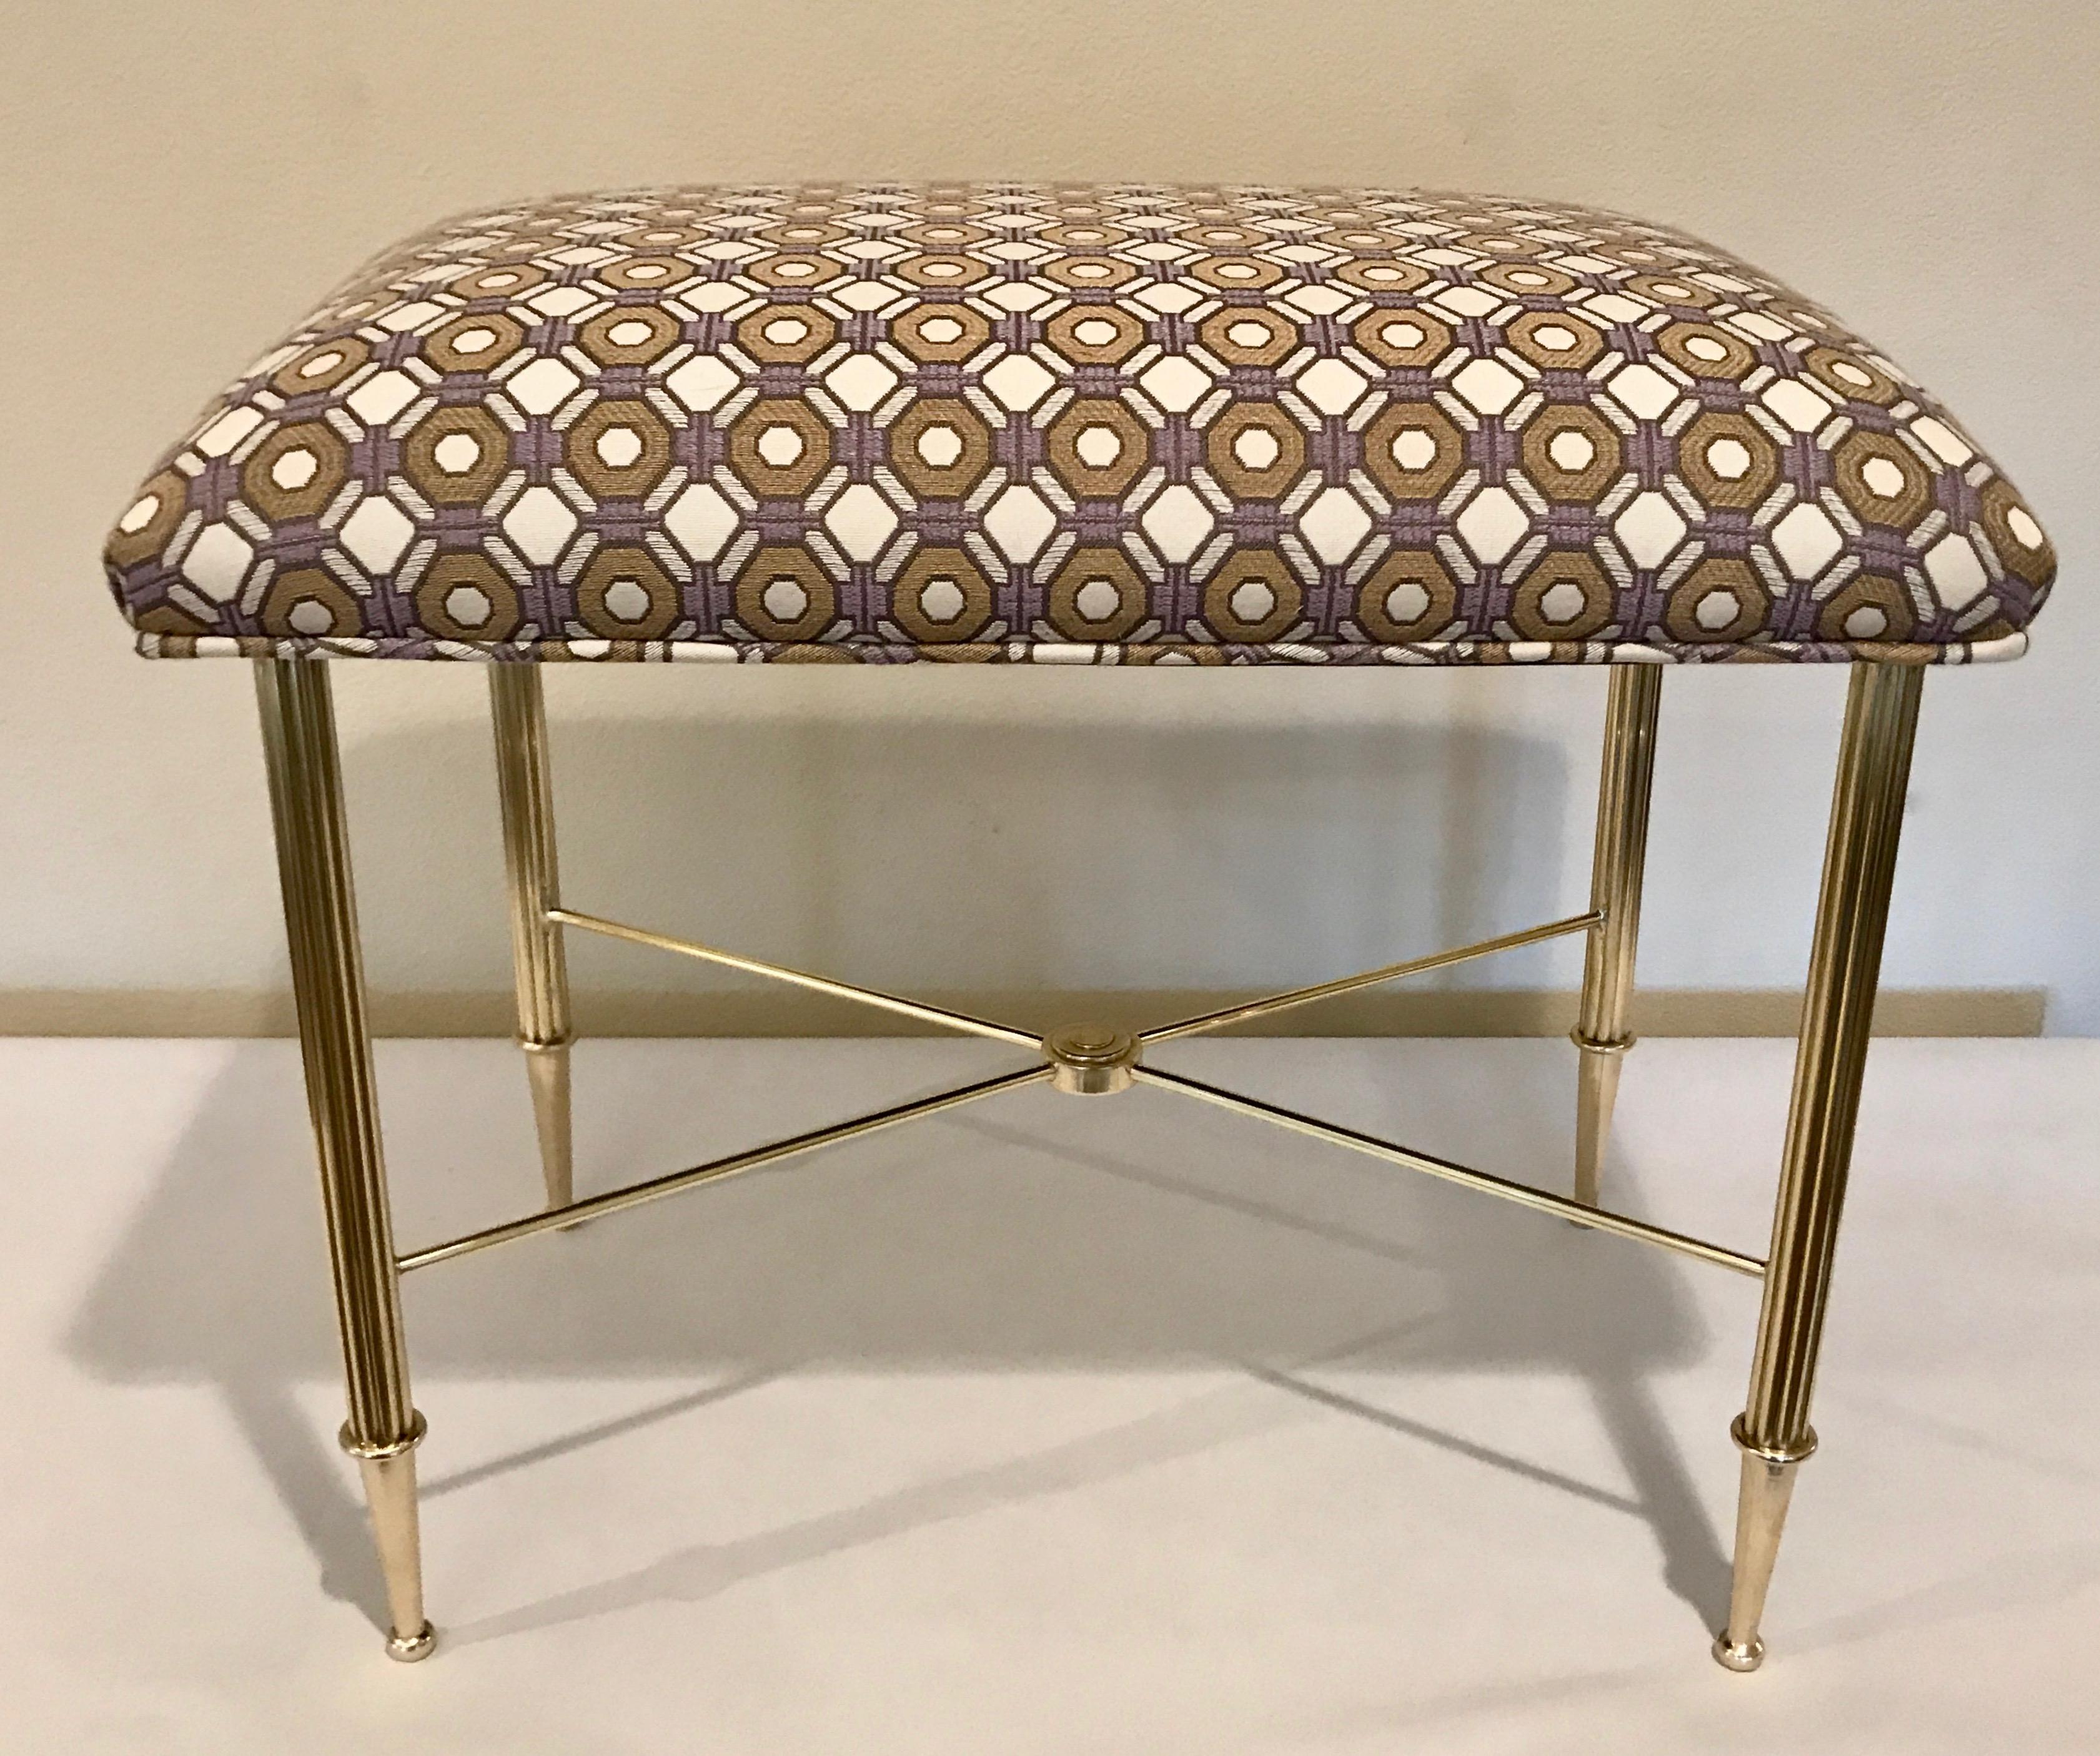 French brass bench or stool with reeded brass legs, stylized tapered feet and X cross bar with newly upholstered top.

Measures: 22